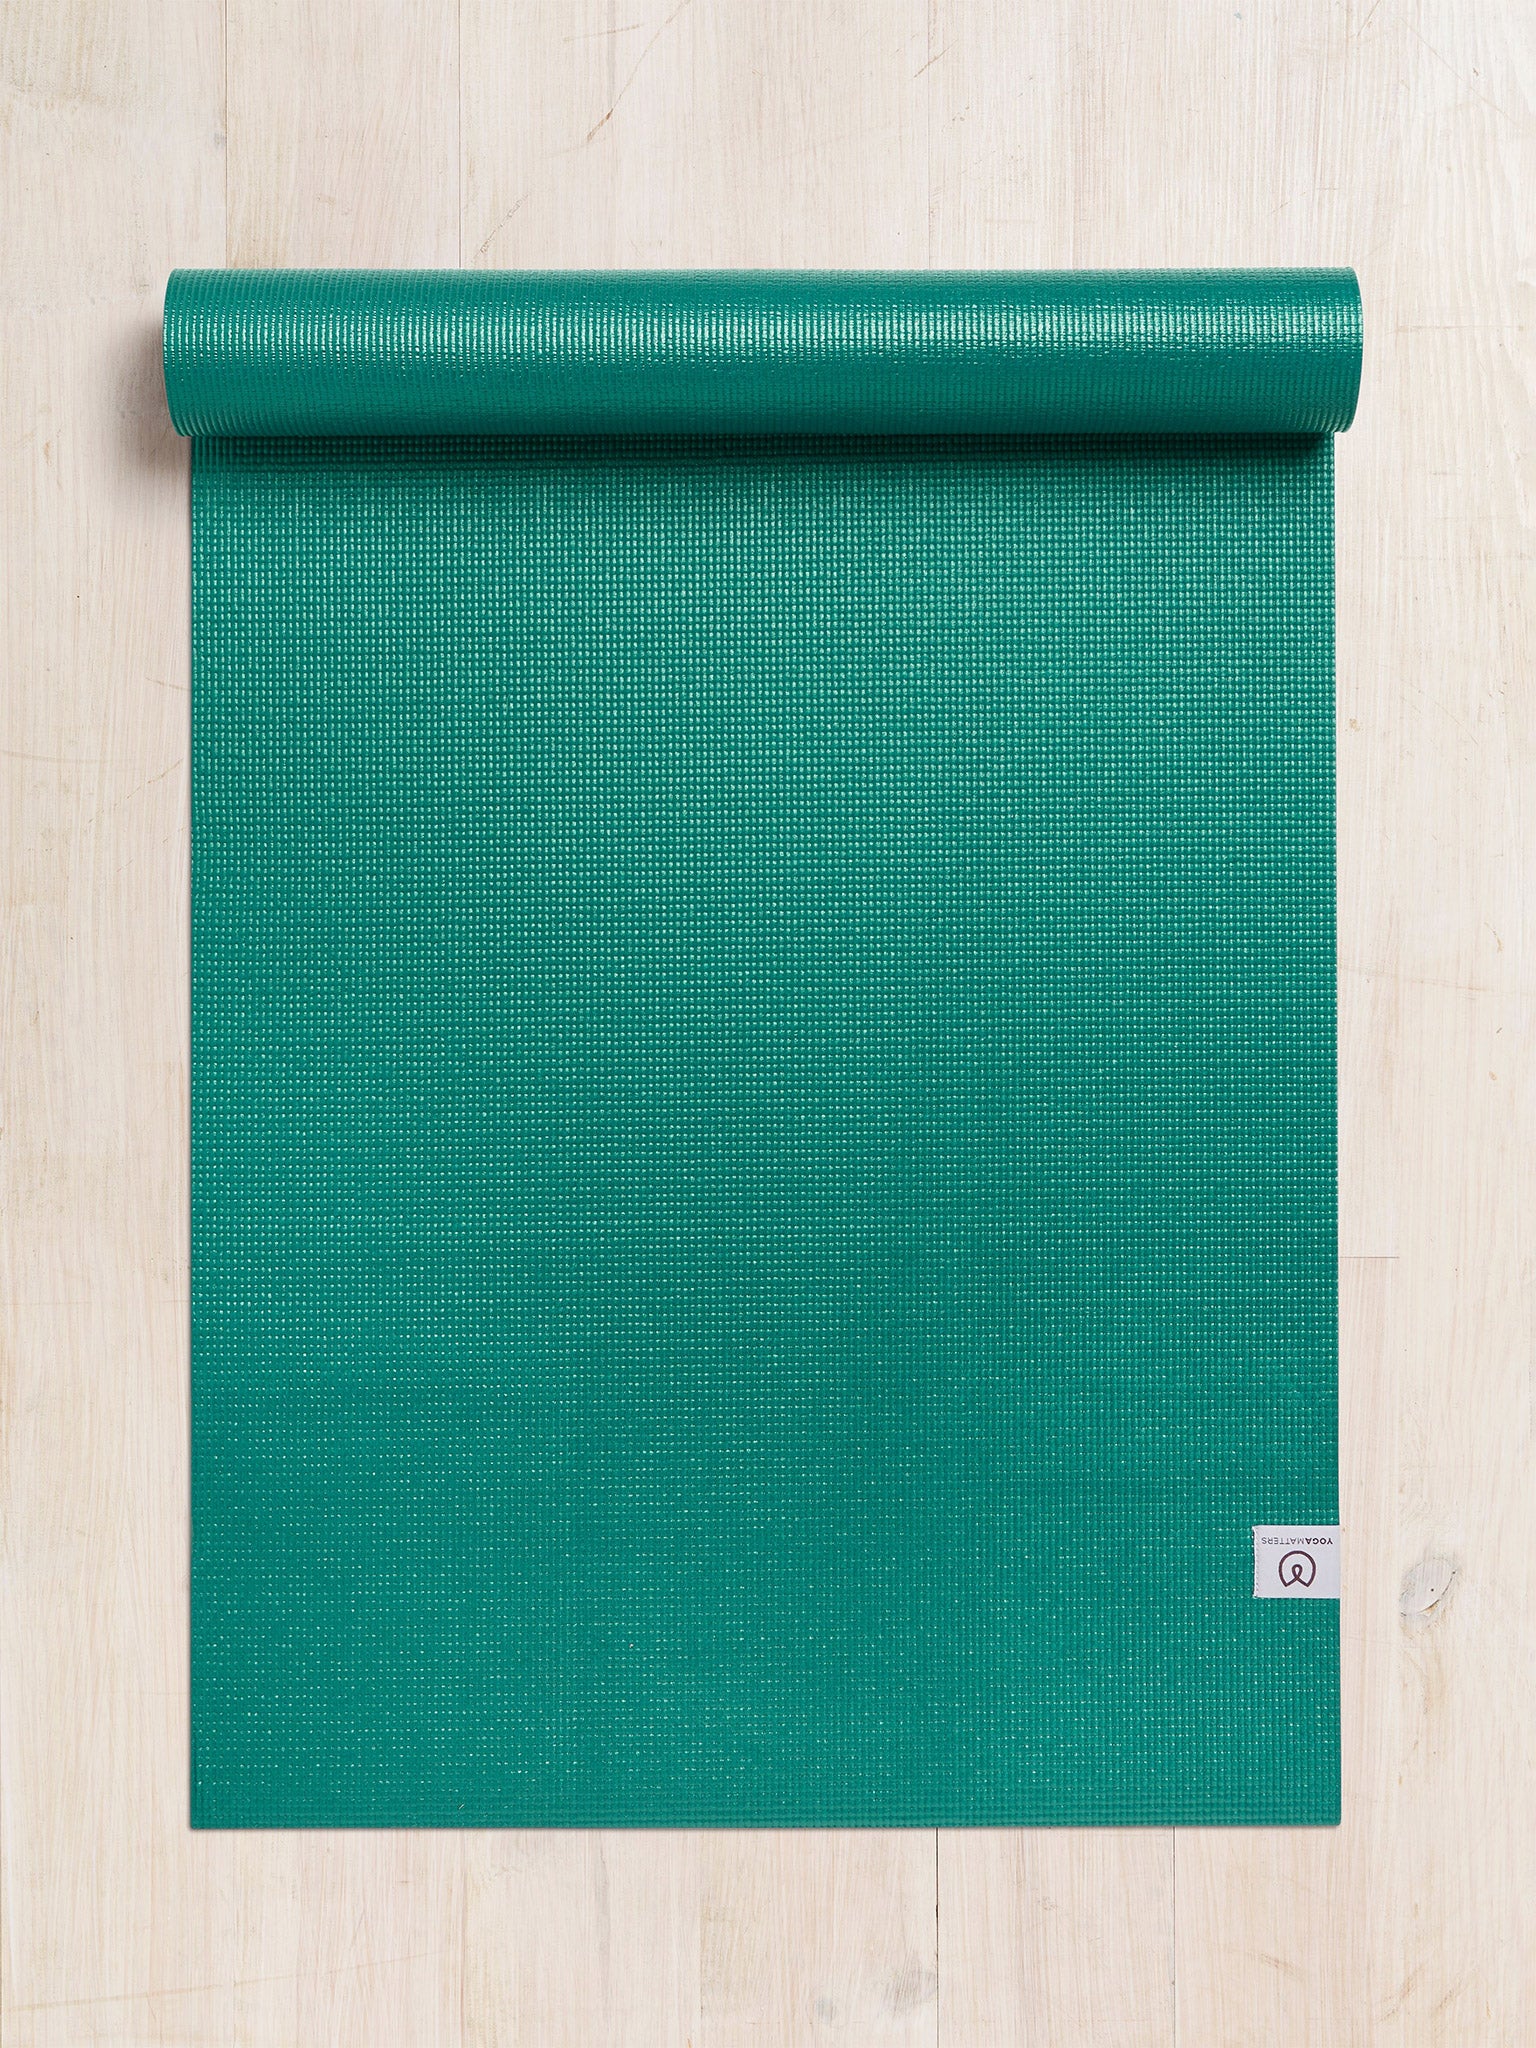 Green yoga mat partially rolled with visible brand logo on textured wooden floor, top view.